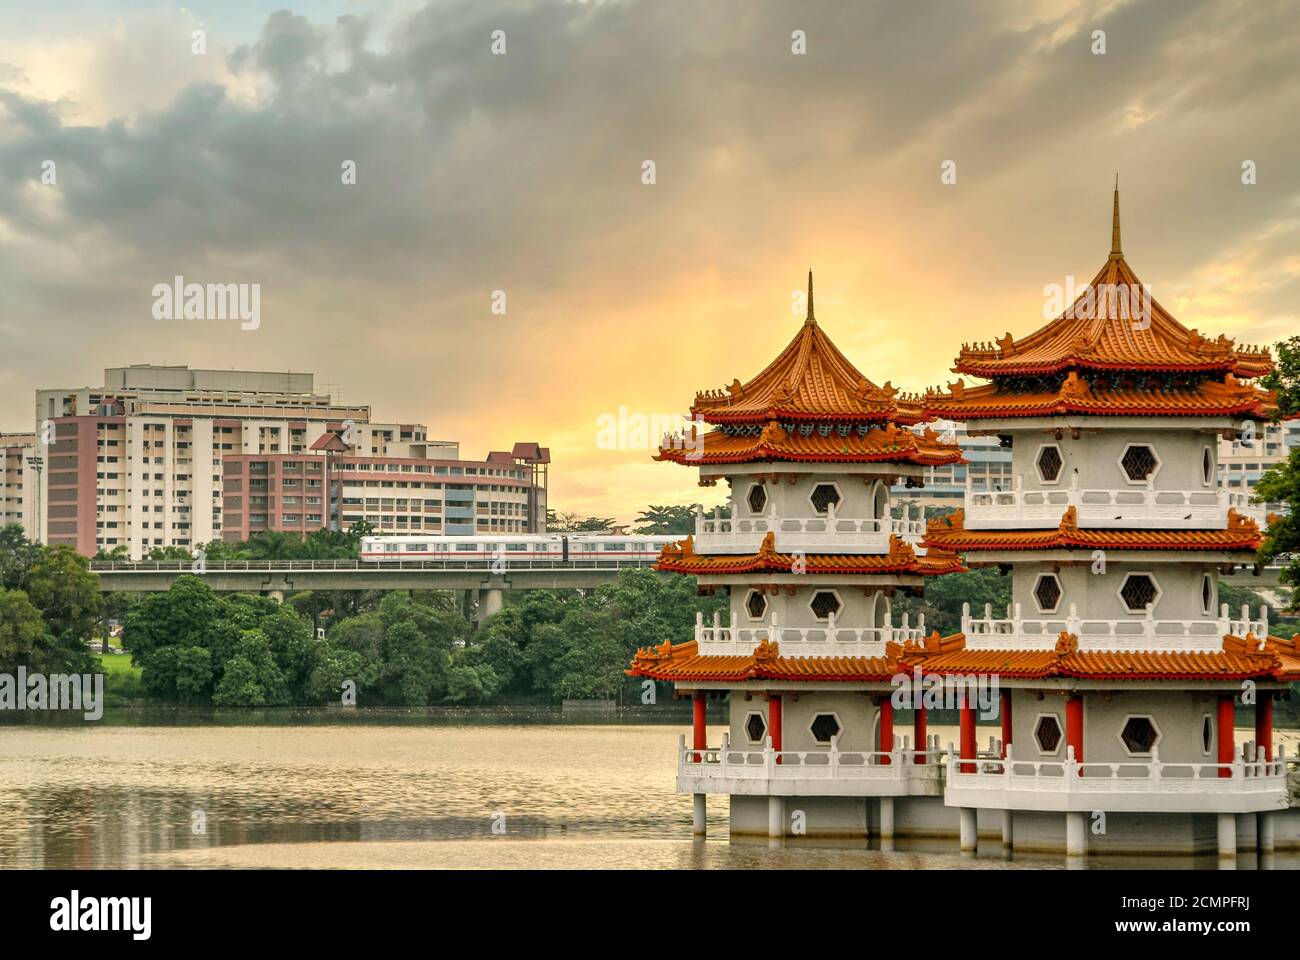 The Twin Pagodas at the Chinese Garden in contrast to modern train and modern HDB buildings in the heartlands of Singapore Stock Photo